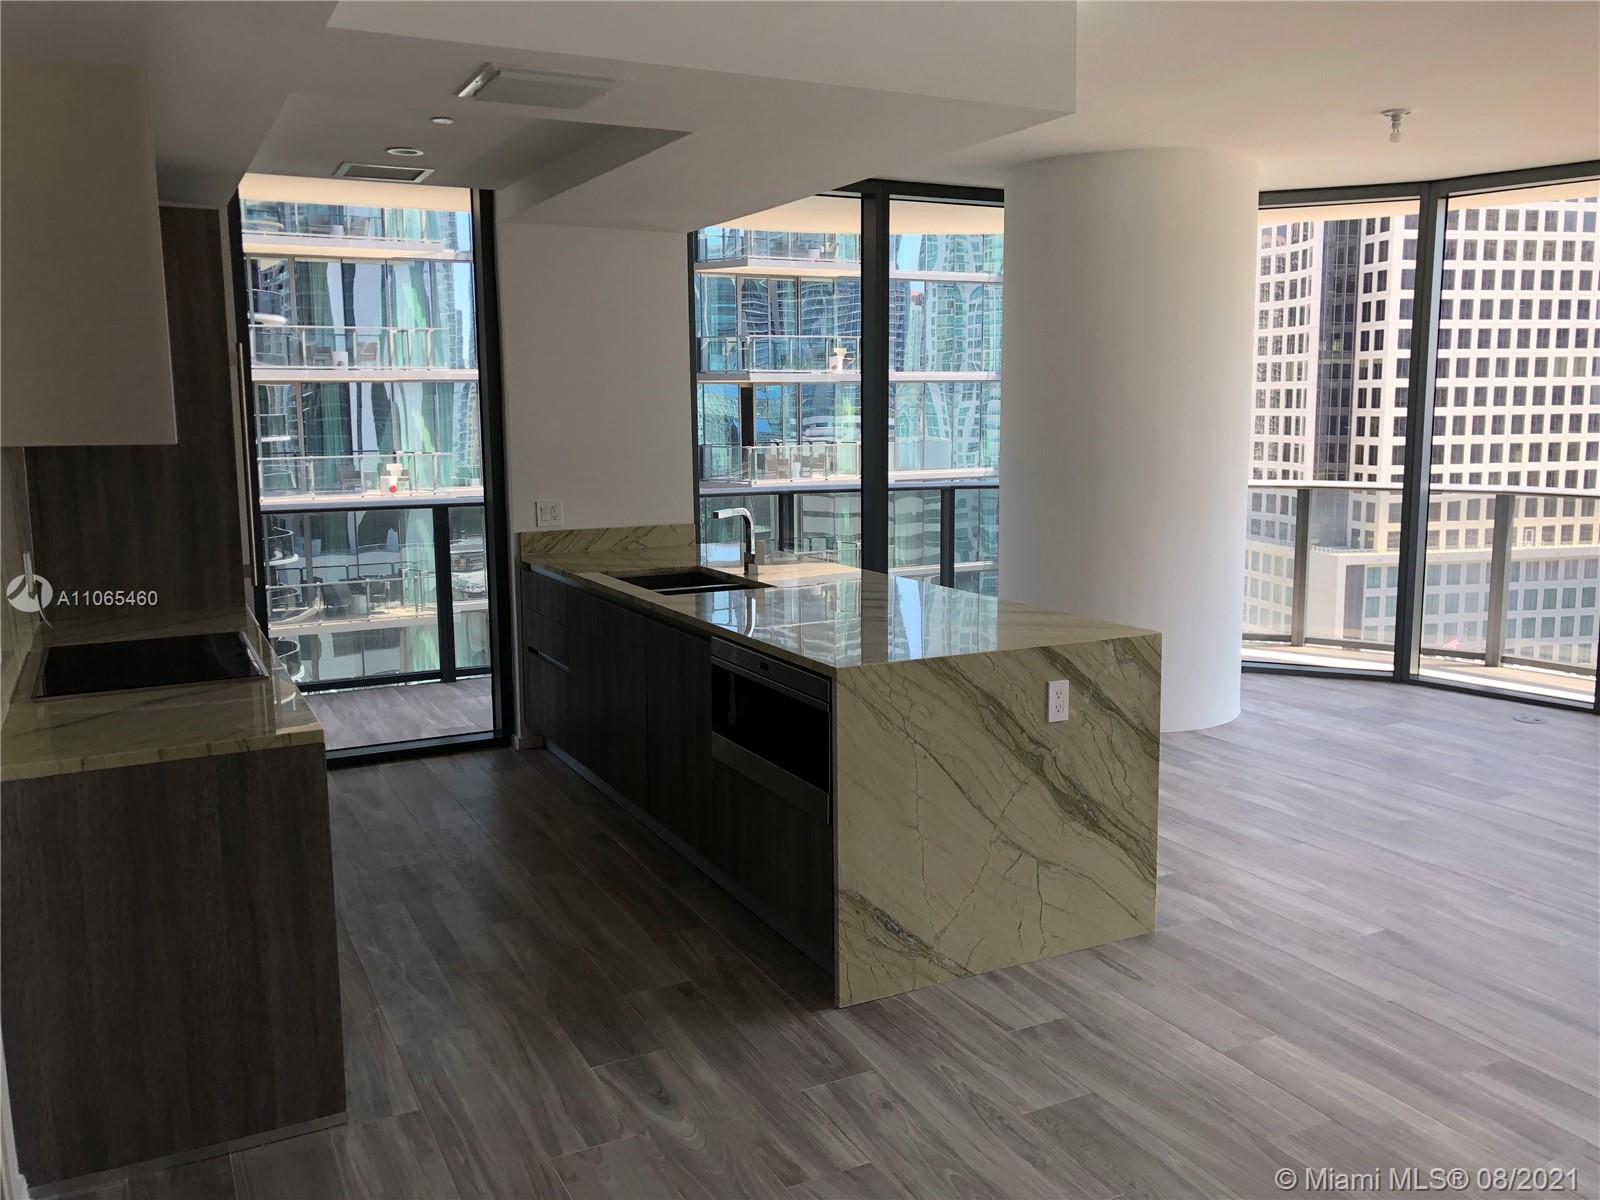 Brand new 2Bed/2Bath corner unit with wrapped-around balcony facing bay and Miami skyline. Private elevator with biometrics technology. Fully upgraded penthouse-like kitchen, wood-like porcelain floors, finished walk-in closet , large master bathroom with double sink, rain shower and separated tub. Incredible amenities include residential only roof top pool, residential only indoor lounge with private wine cellar, several lounge areas throughout the building, SPA with relaxing area and three treatment rooms, fully equipped gym, kids' room, full service pool and cabana lounge, pool and poker tables, tennis court, 24/7 concierge service.